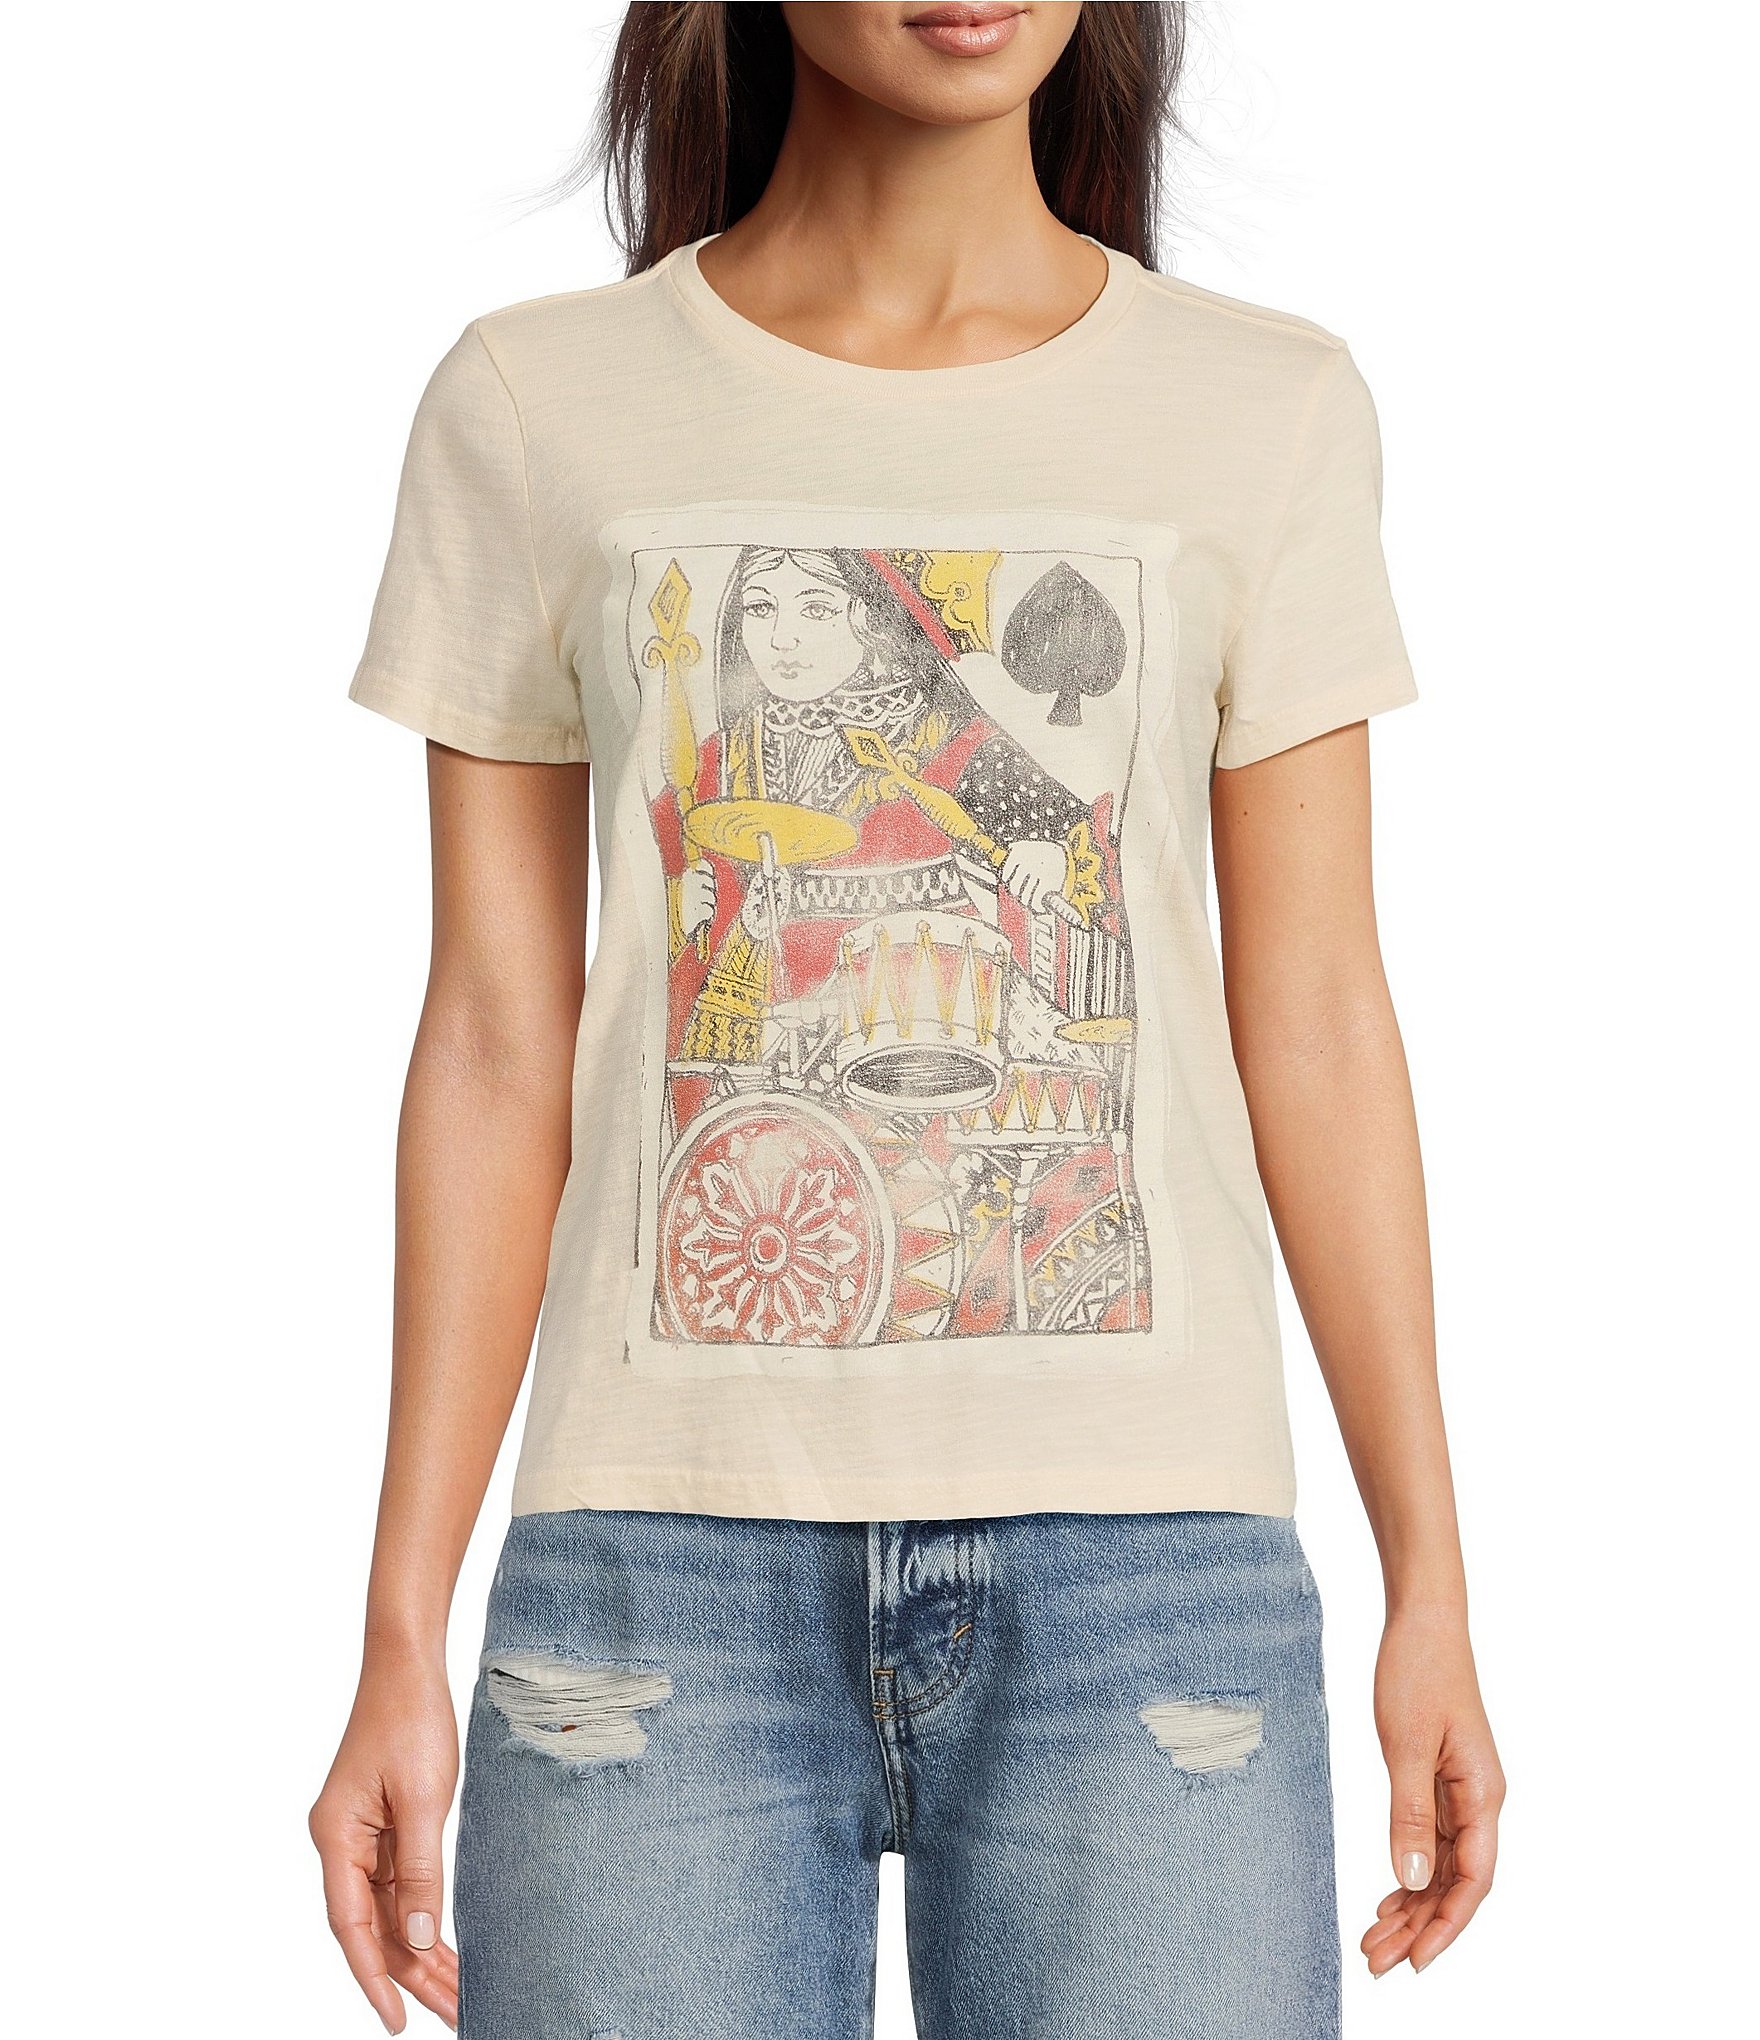 https://dimg.dillards.com/is/image/DillardsZoom/zoom/lucky-brand-knit-queen-of-spades-crew-neck-short-sleeve-relaxed-fit-classic-tee/00000000_zi_497d9749-a30d-4c63-ad25-58c234b5cbbc.jpg